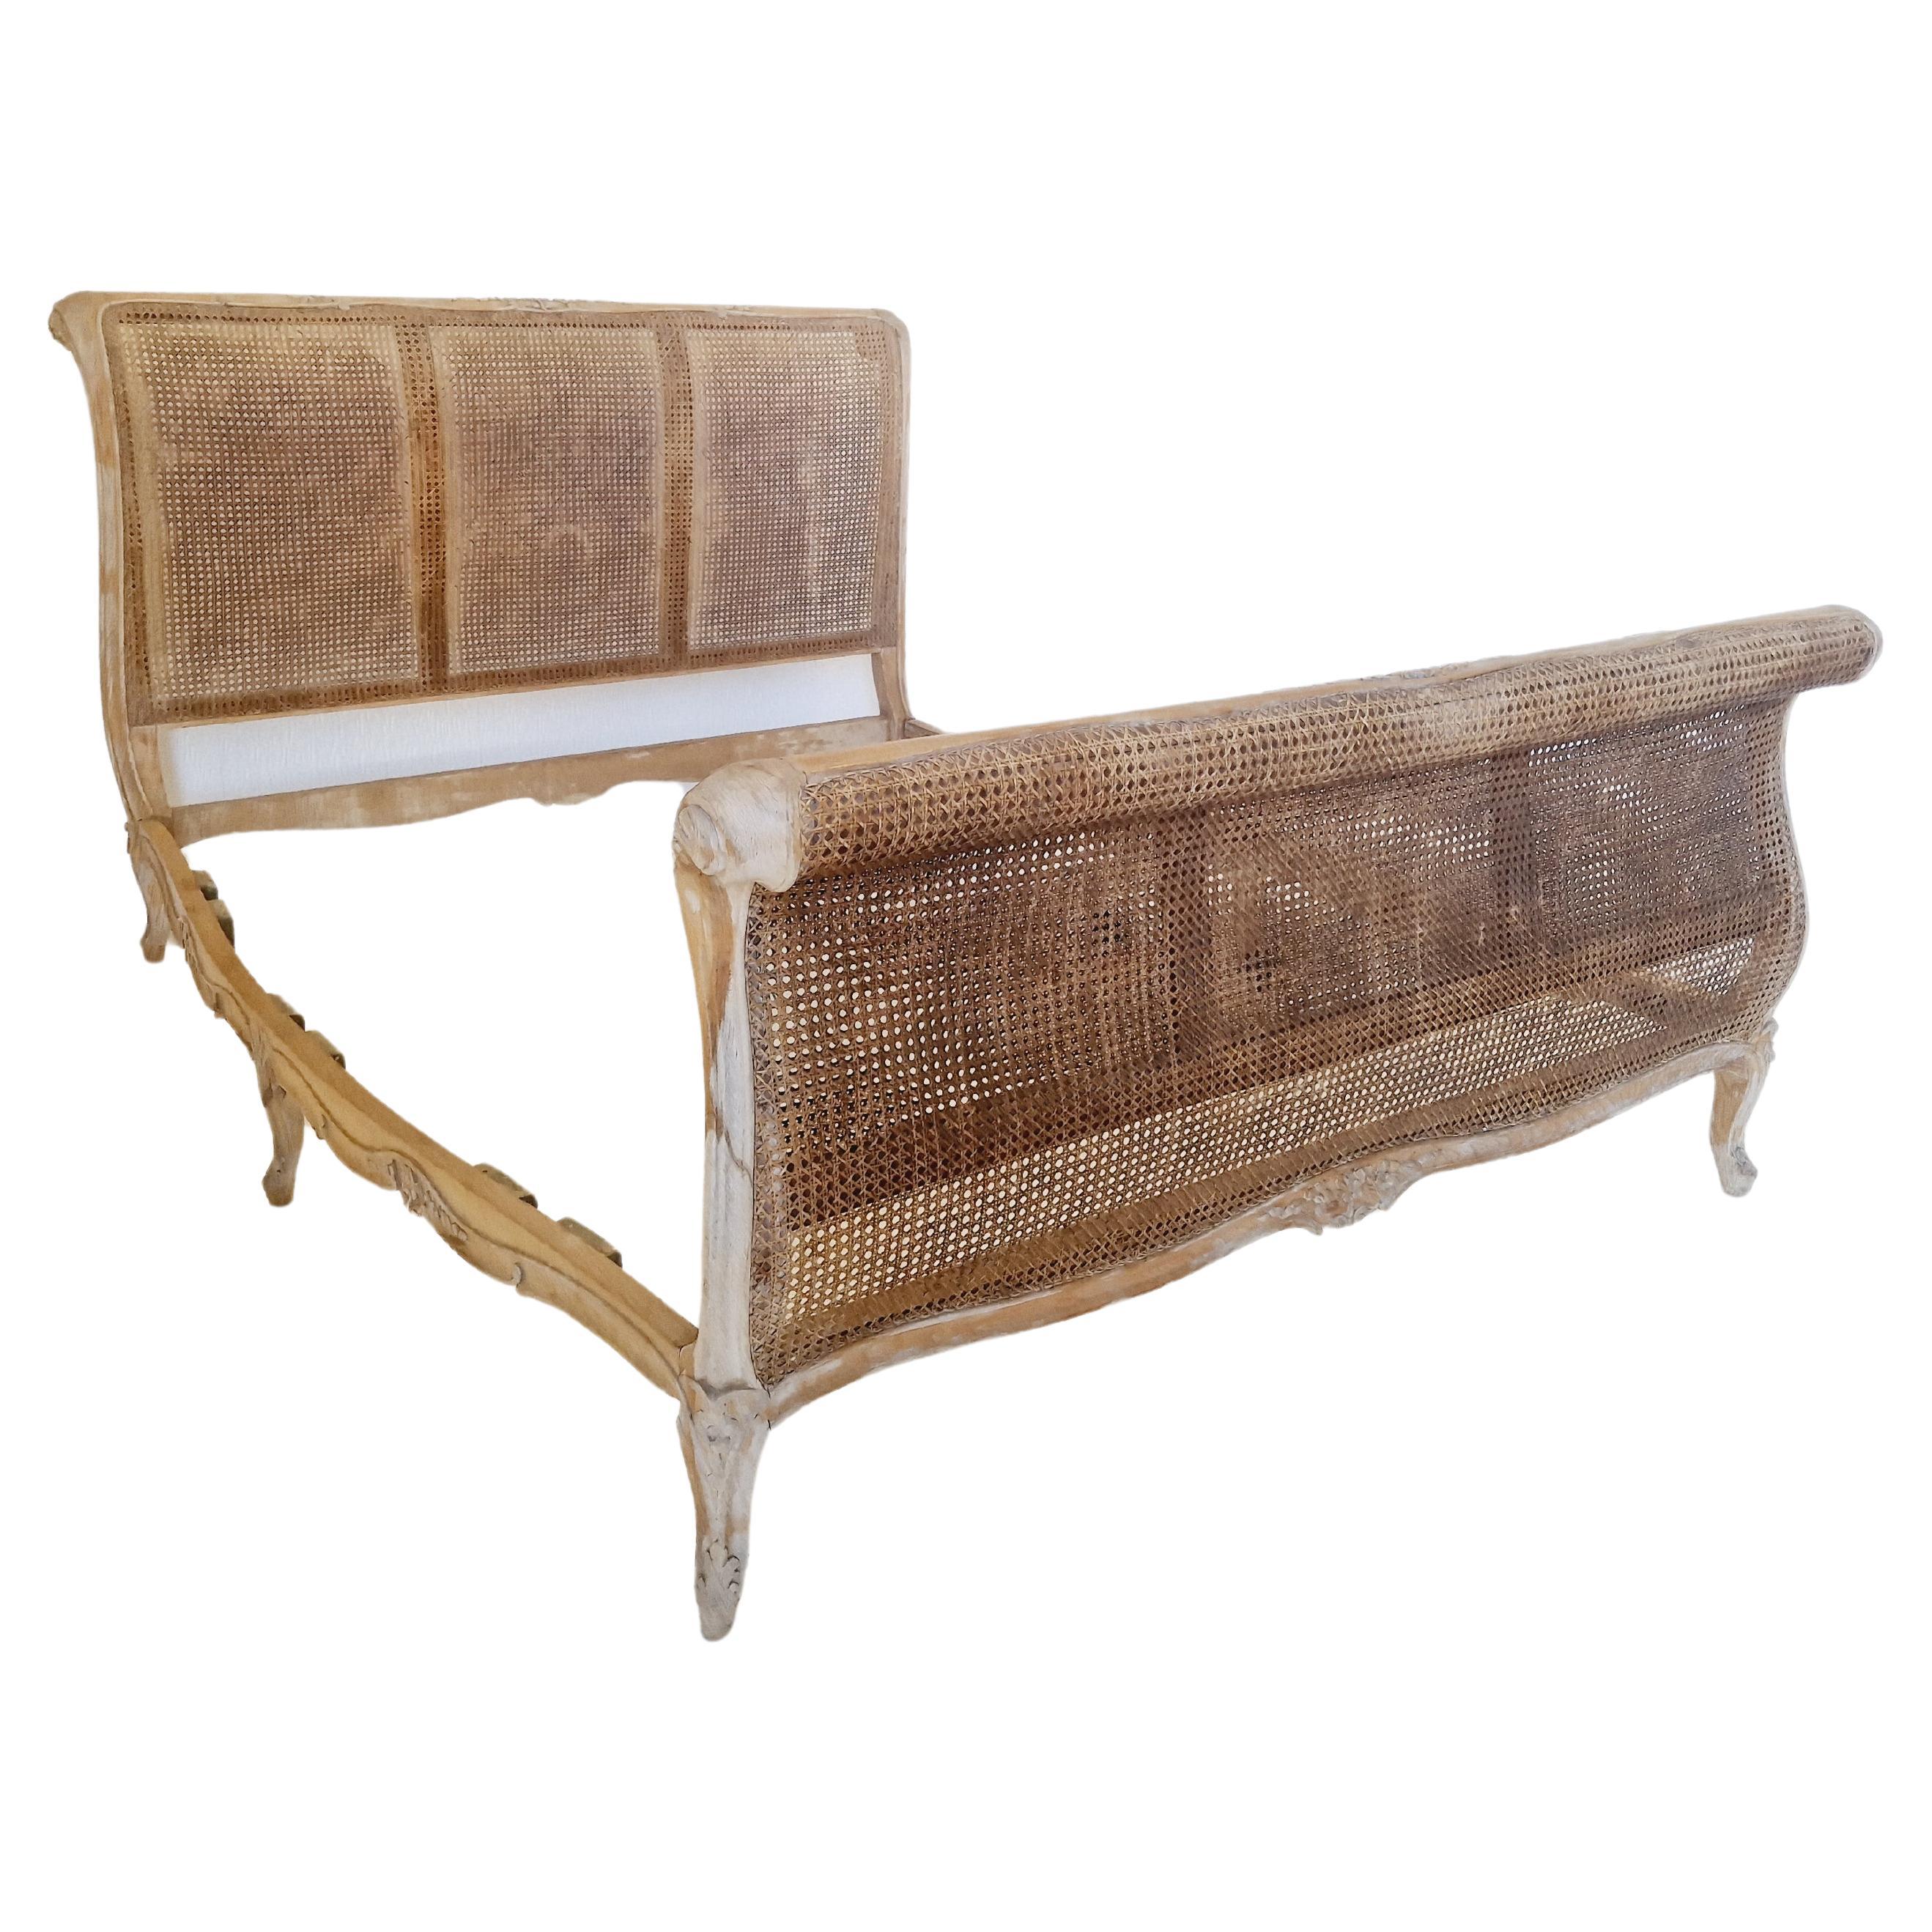 Antique French Cane Bed Louis XV Sleigh Style For Sale